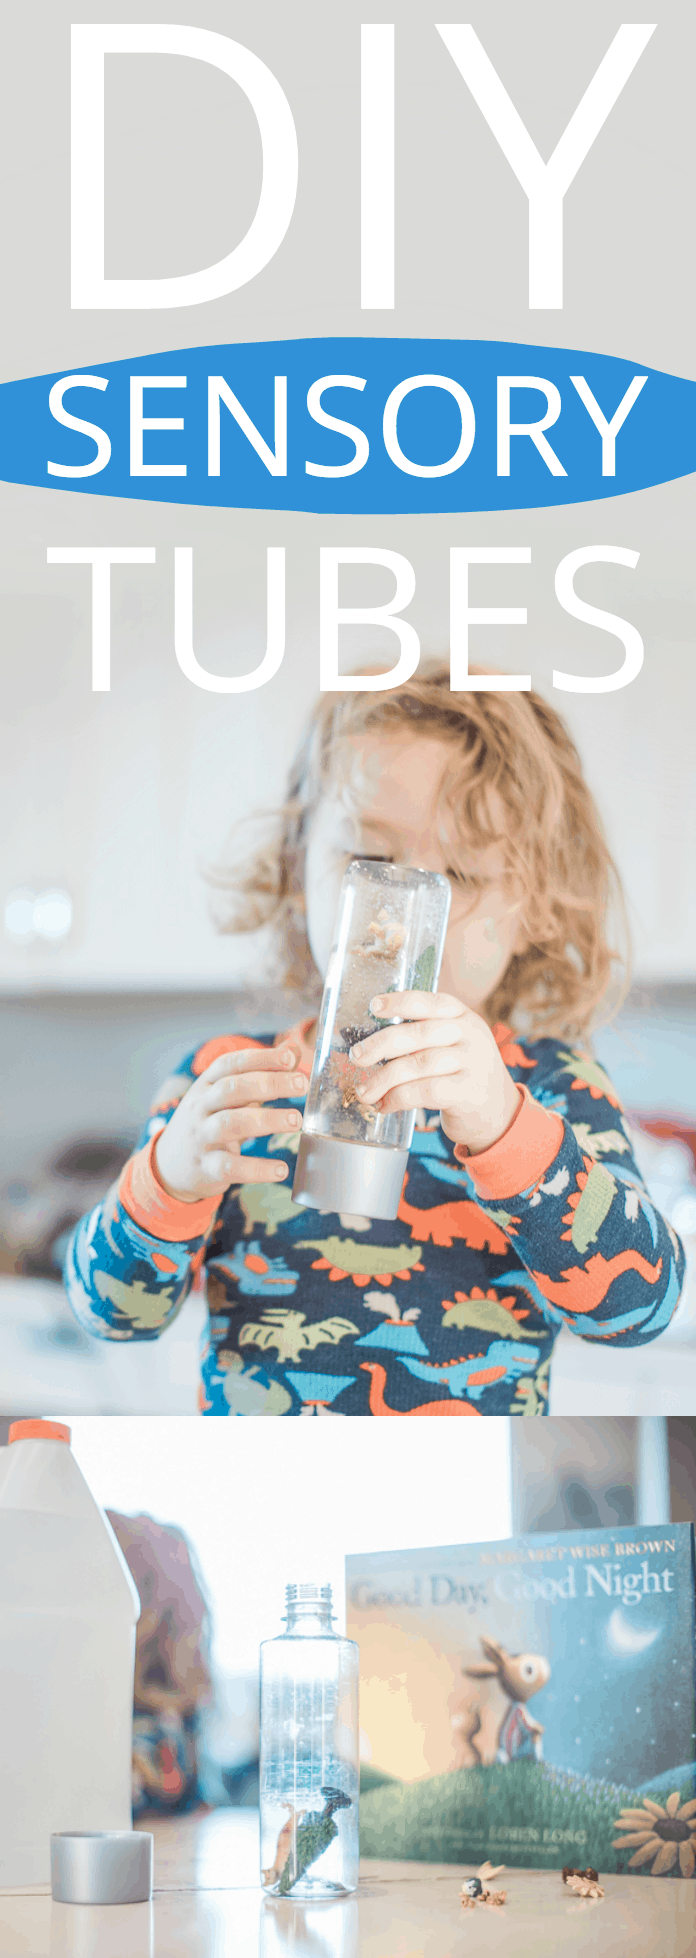 DIY sensory tubes for story time made with 2 ingredients + a water bottle and trinkets